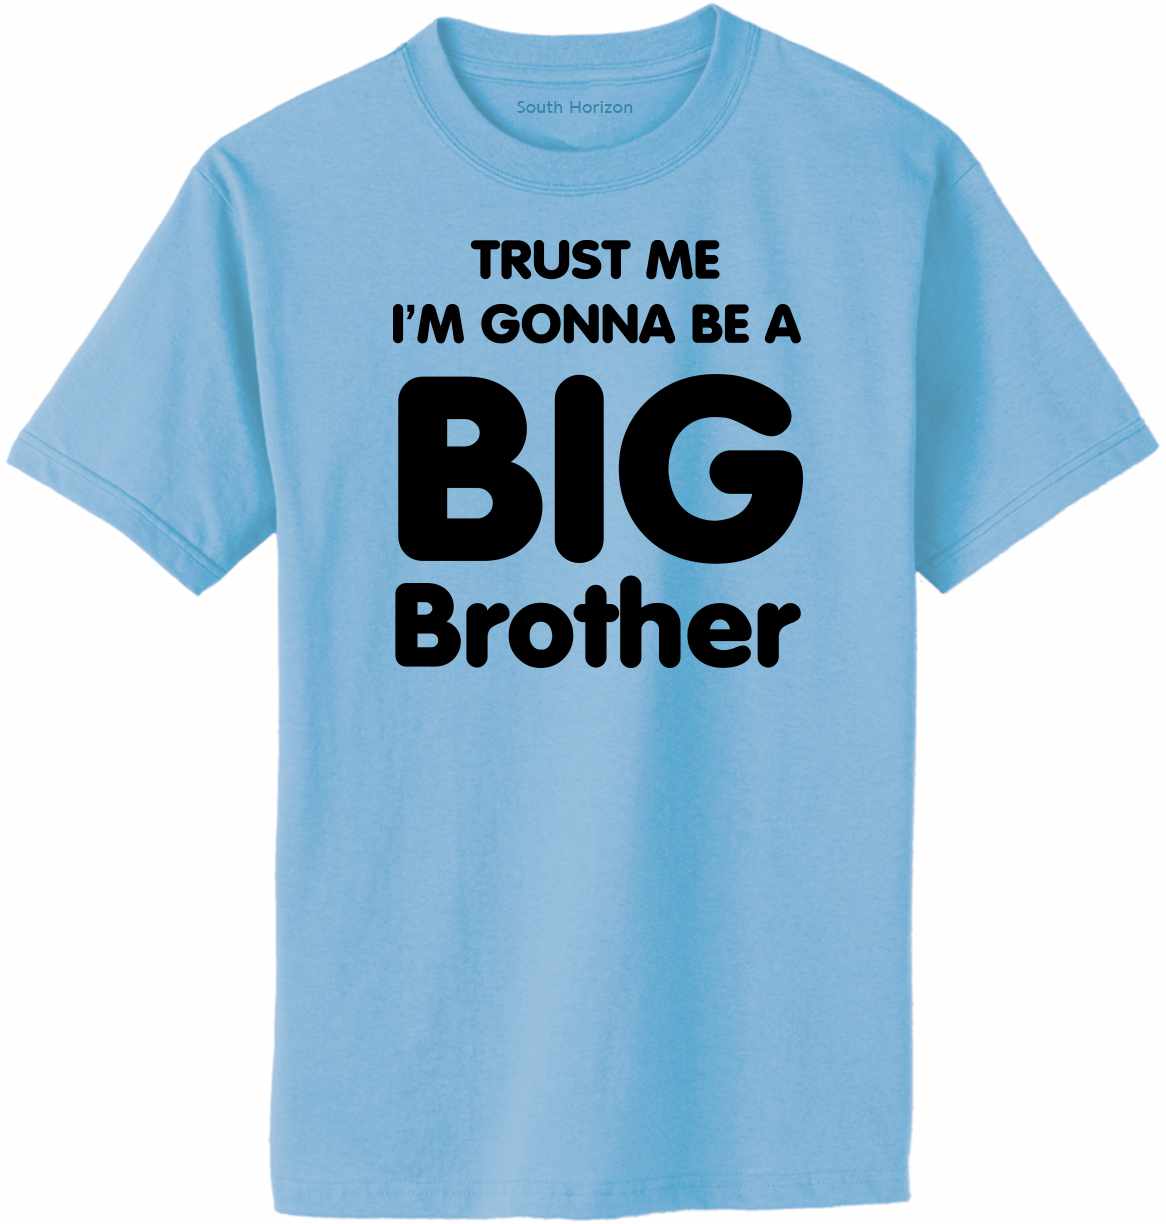 Trust Me I'm Gonna be a Big Brother Adult T-Shirt